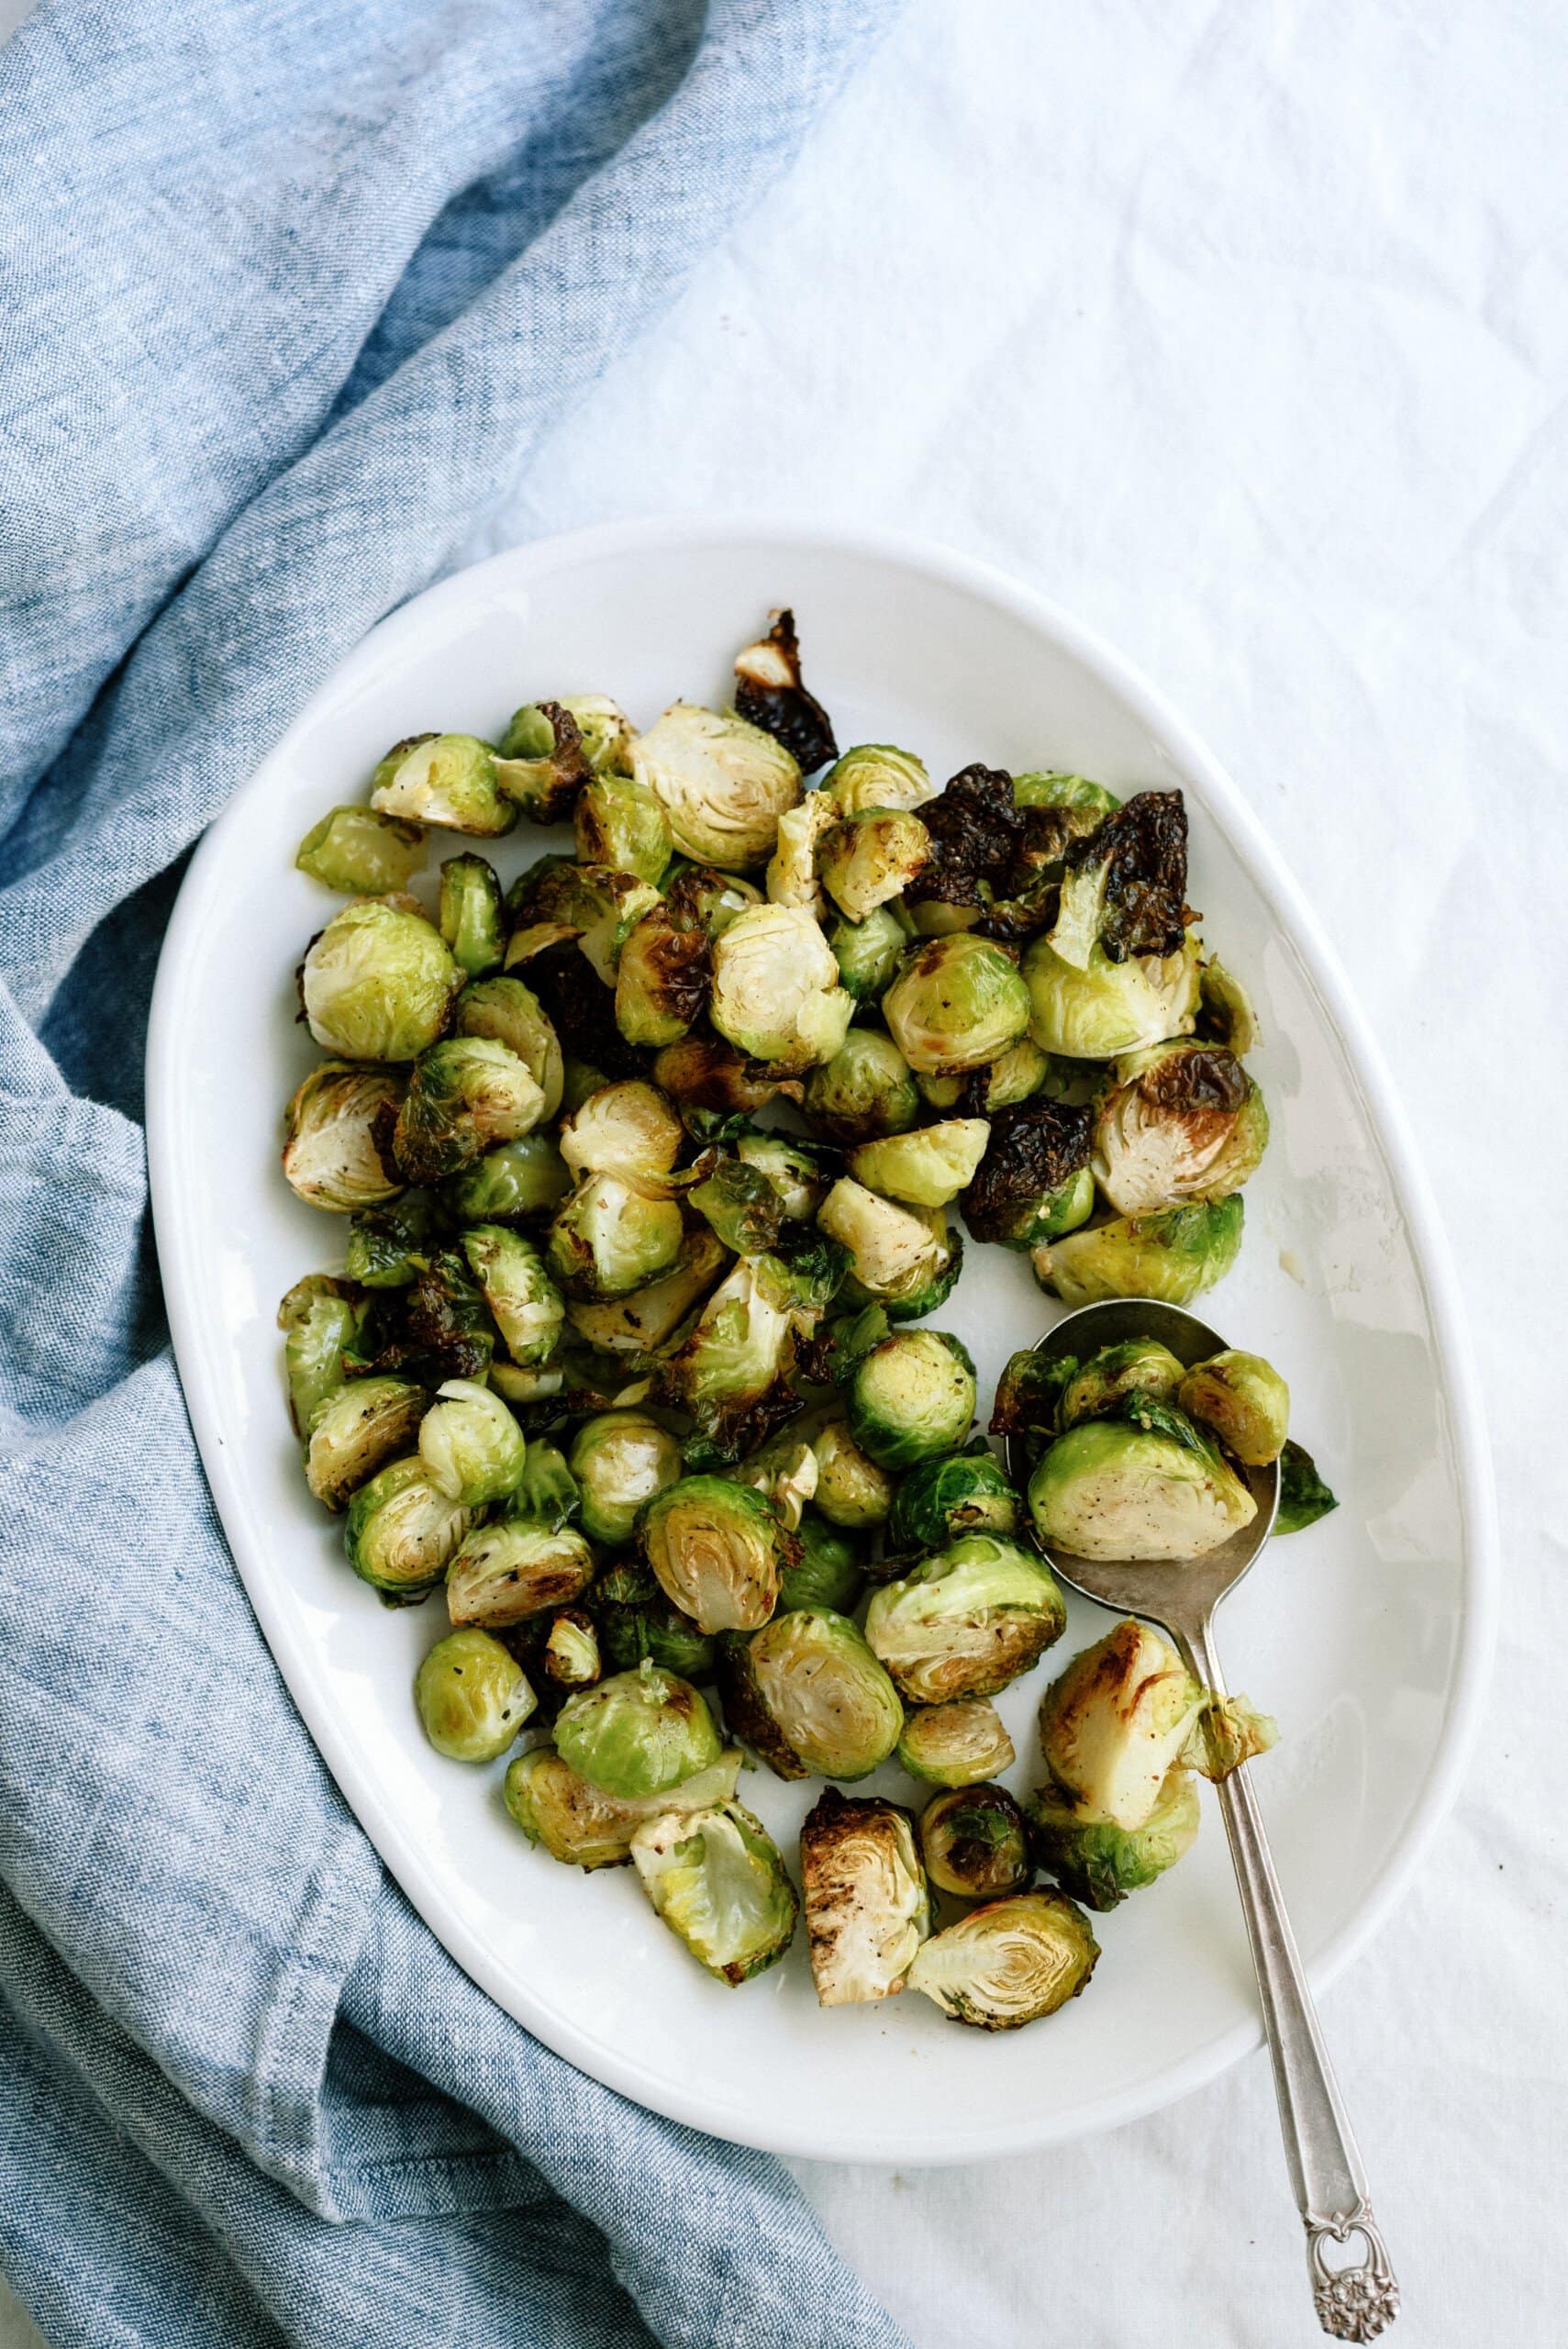 Top view of roasted Brussels sprouts on a white serving plate